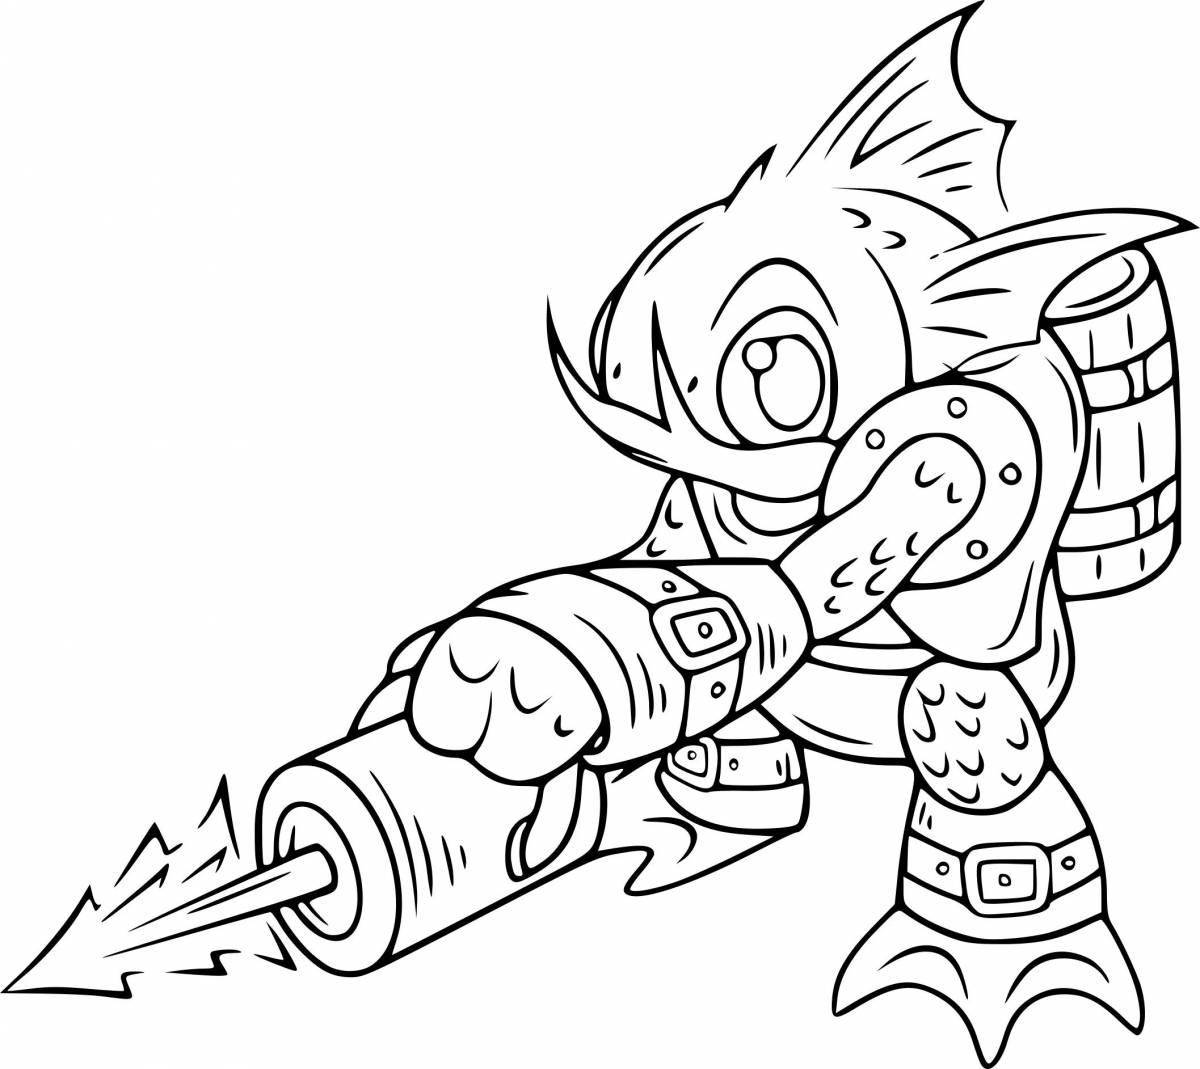 Creative video game coloring page